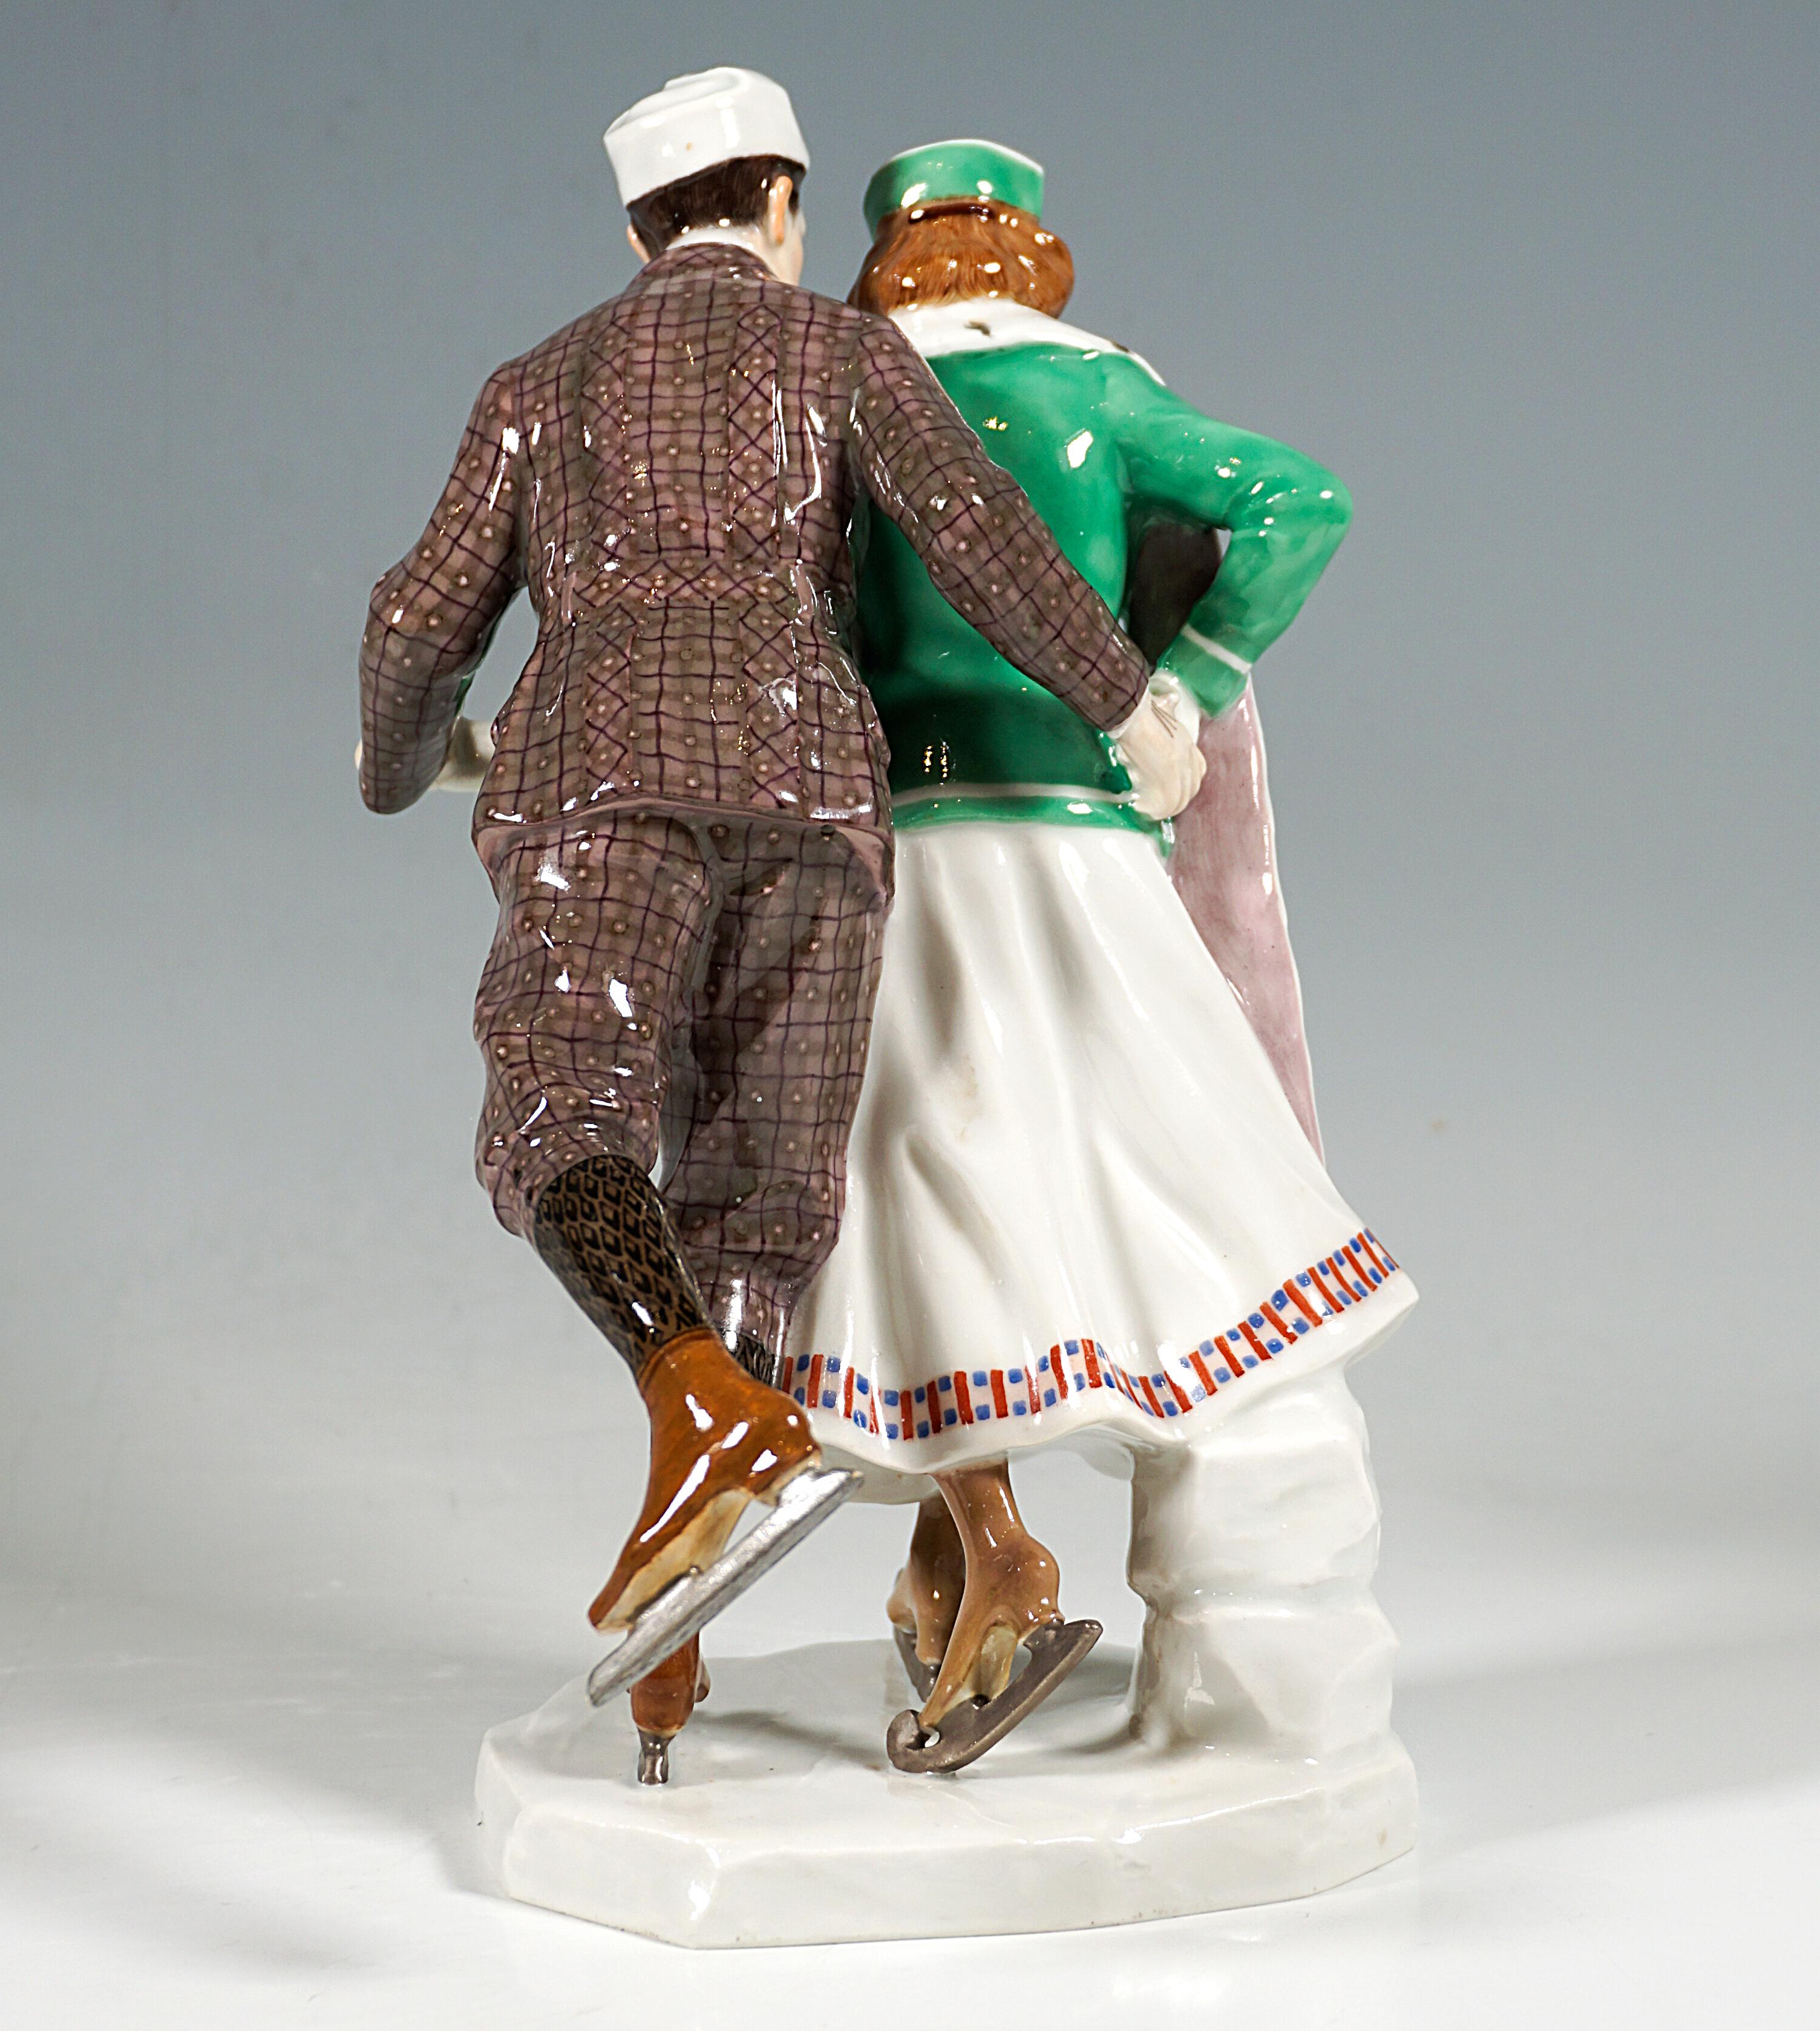 Hand-Crafted Art Nouveau Figure Group 'Ice-Scater', by Alfred Koenig, Meissen Germany, 1910